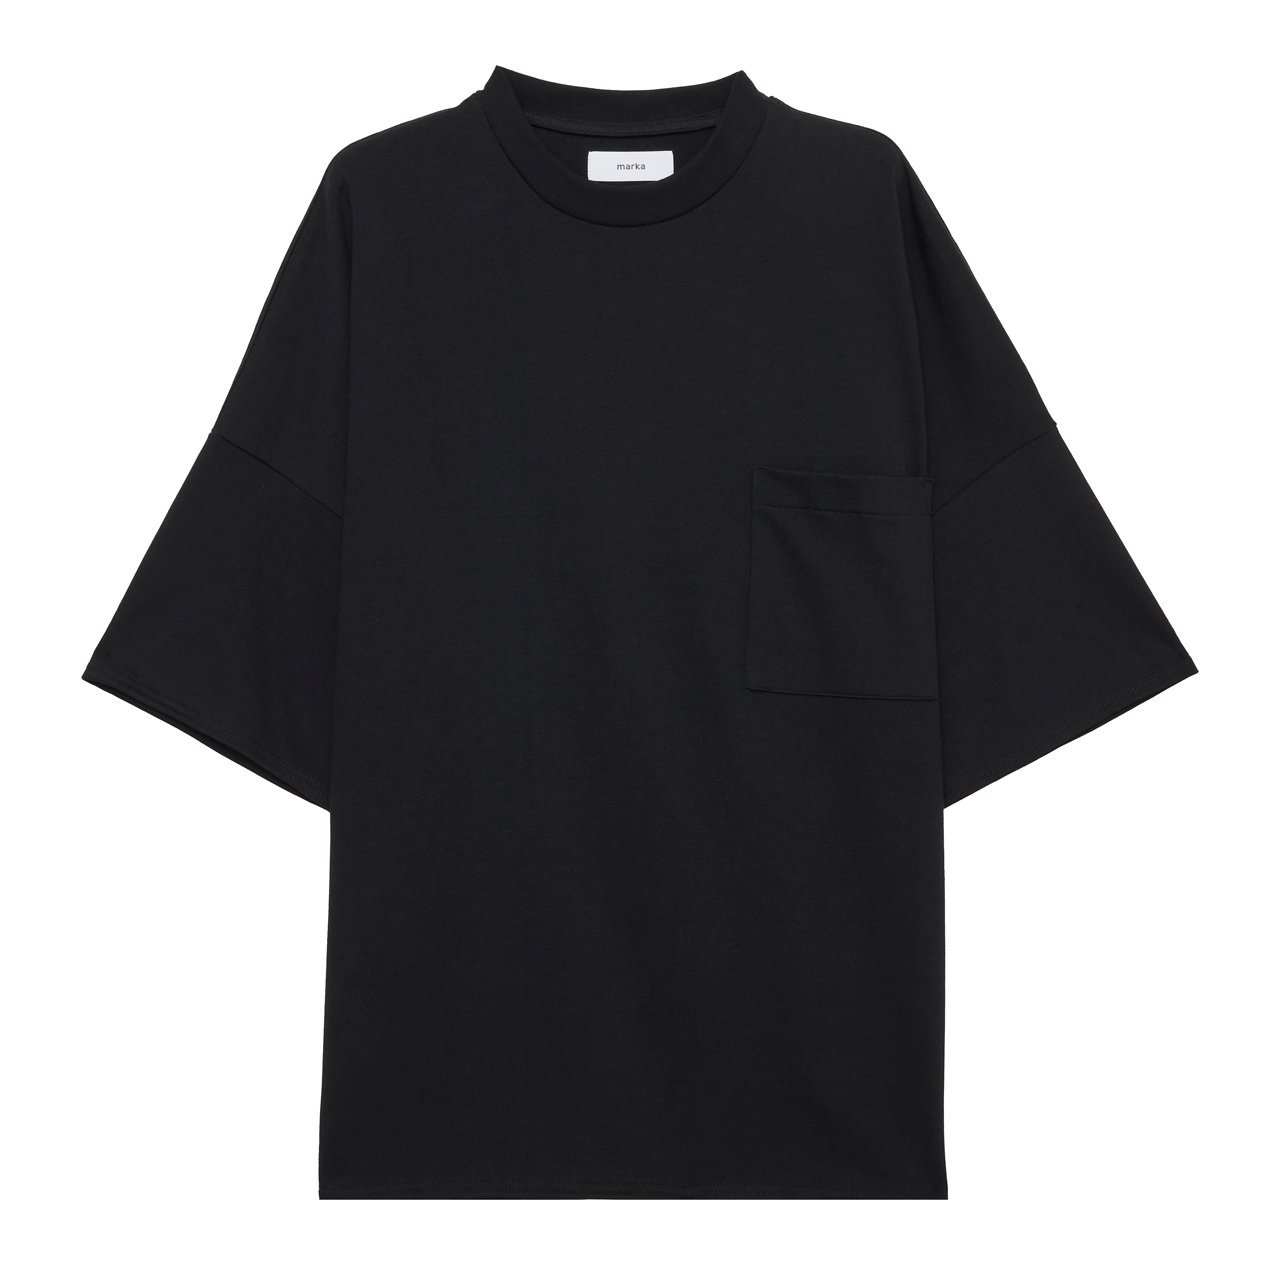 <img class='new_mark_img1' src='https://img.shop-pro.jp/img/new/icons5.gif' style='border:none;display:inline;margin:0px;padding:0px;width:auto;' />marka (ޡ)POCKET TEE BLACK -20//1 RECYCLE SUVIN ORGANIAC COTTON KNIT-